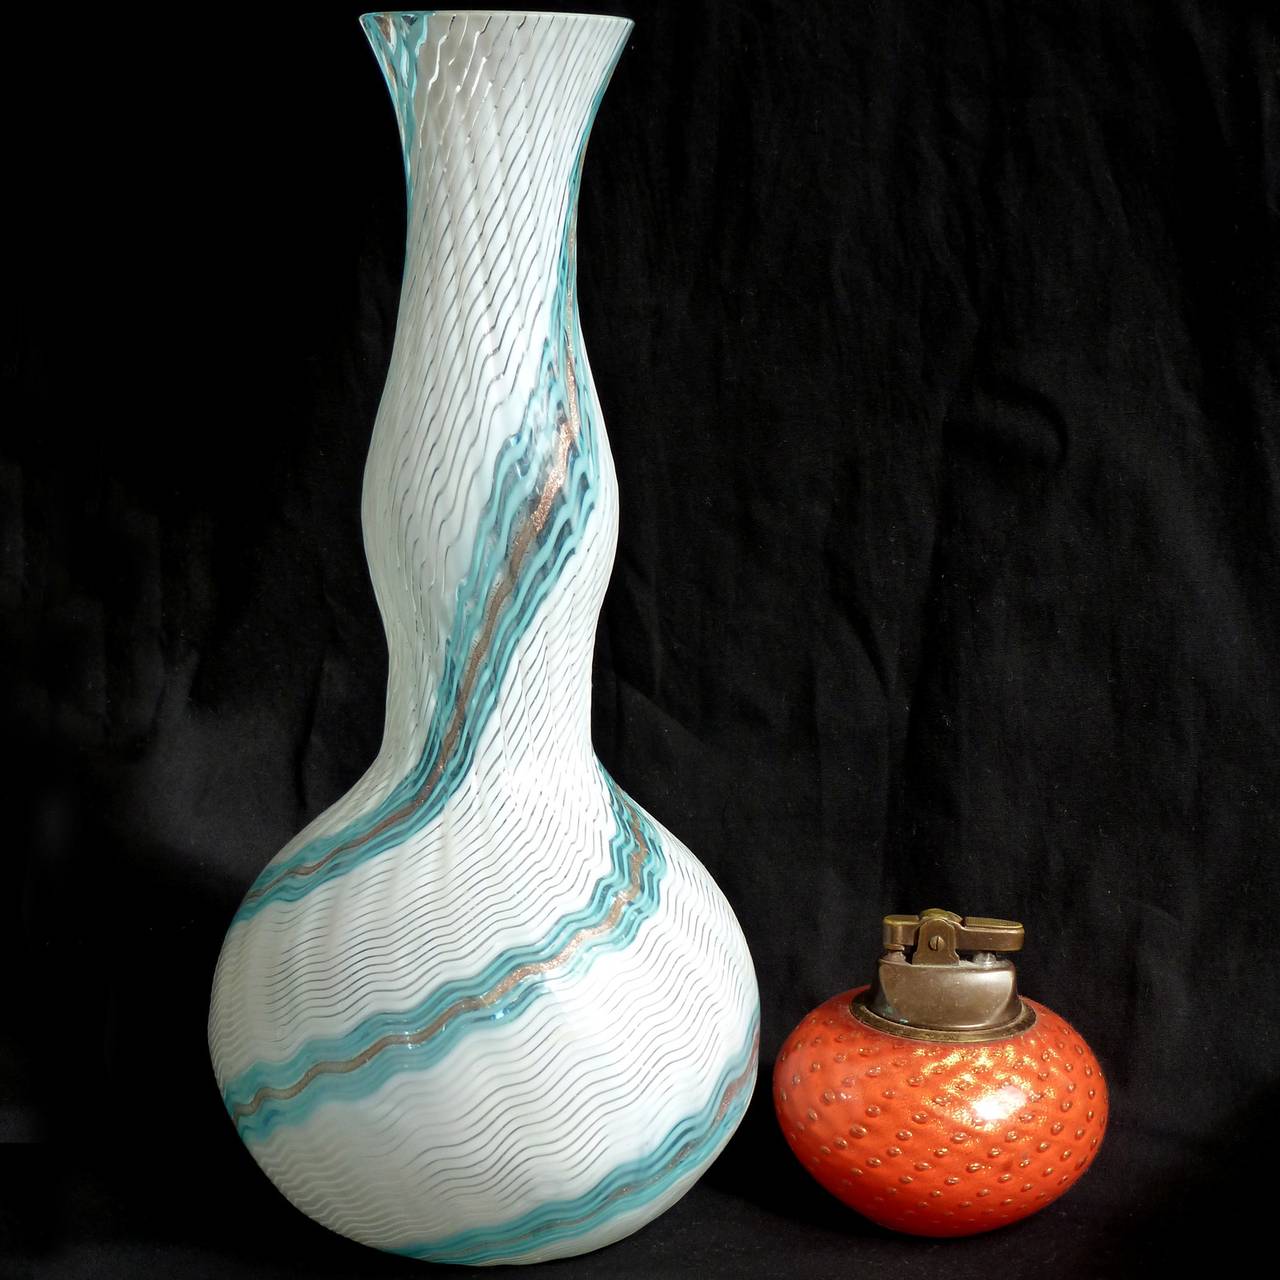 FREE Shipping Worldwide! See details below description.

Amazing Murano Hand Blown Blue, Copper Aventurine Flecks and White Filigrana Ribbons Art Glass Flower Vase. Documented to designer Dino Martens for Aureliano Toso, in the 